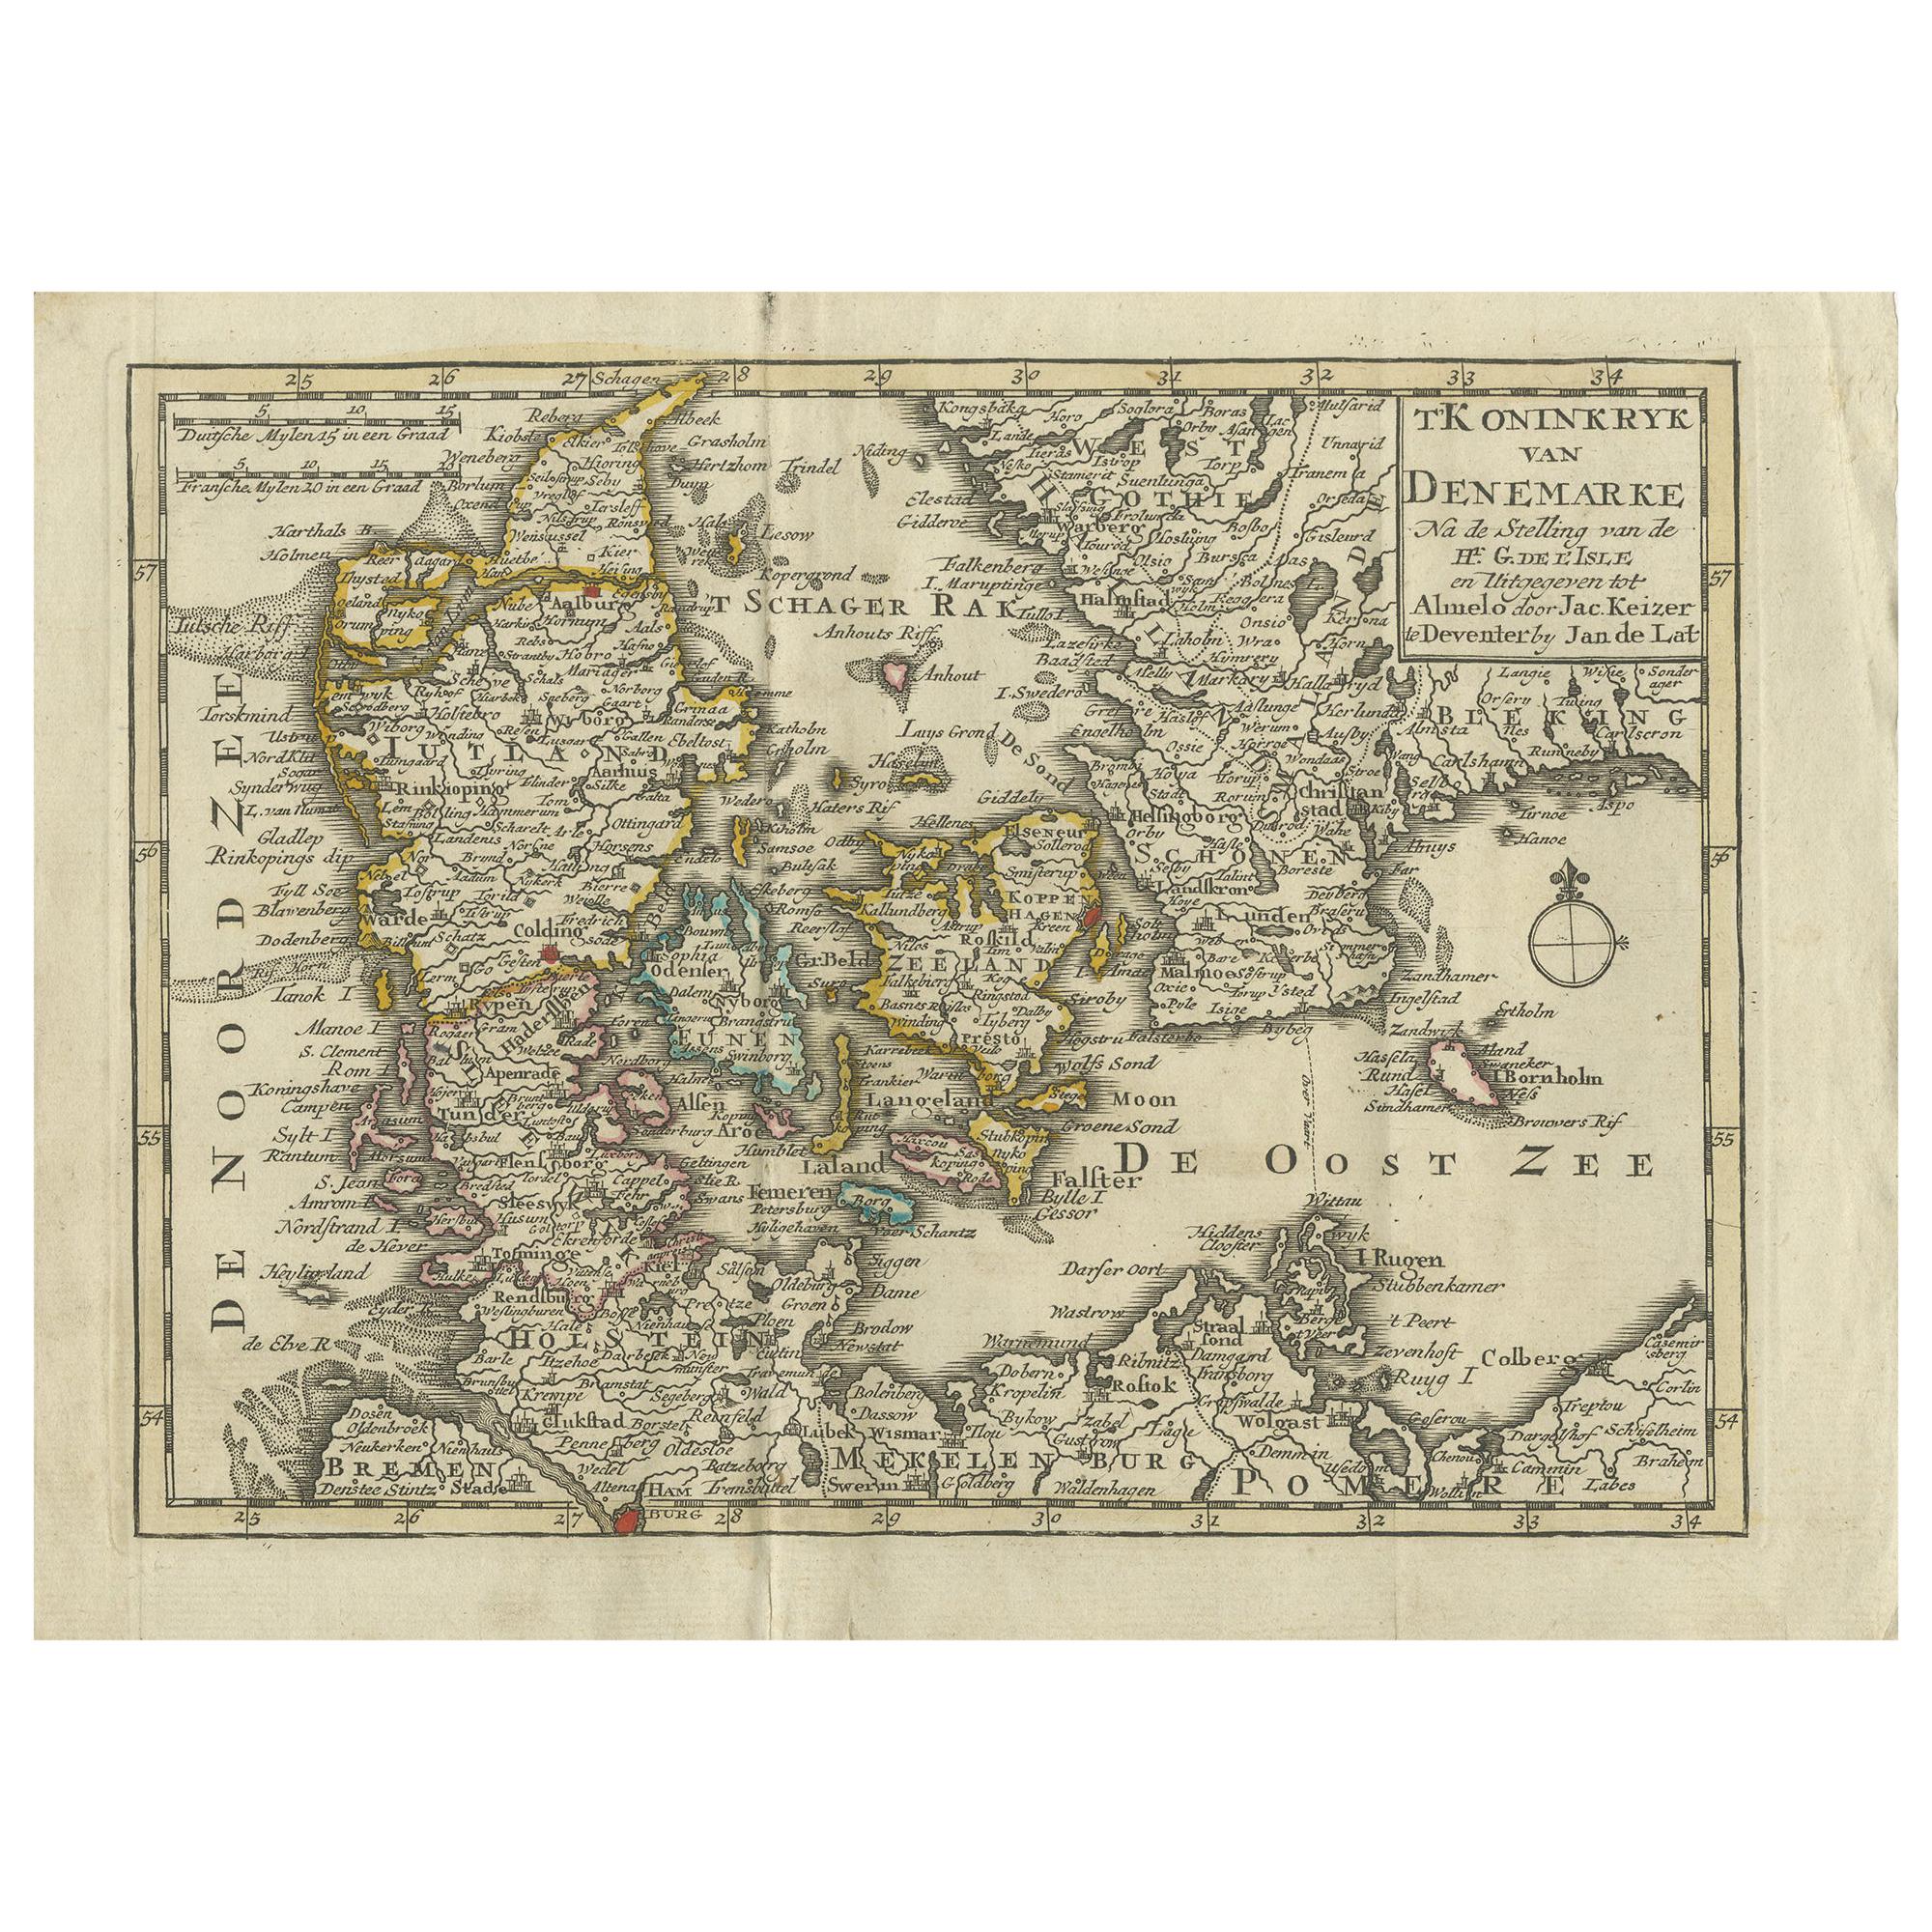 Antique Map of the Kingdom of Denmark by Keizer & de Lat, 1788